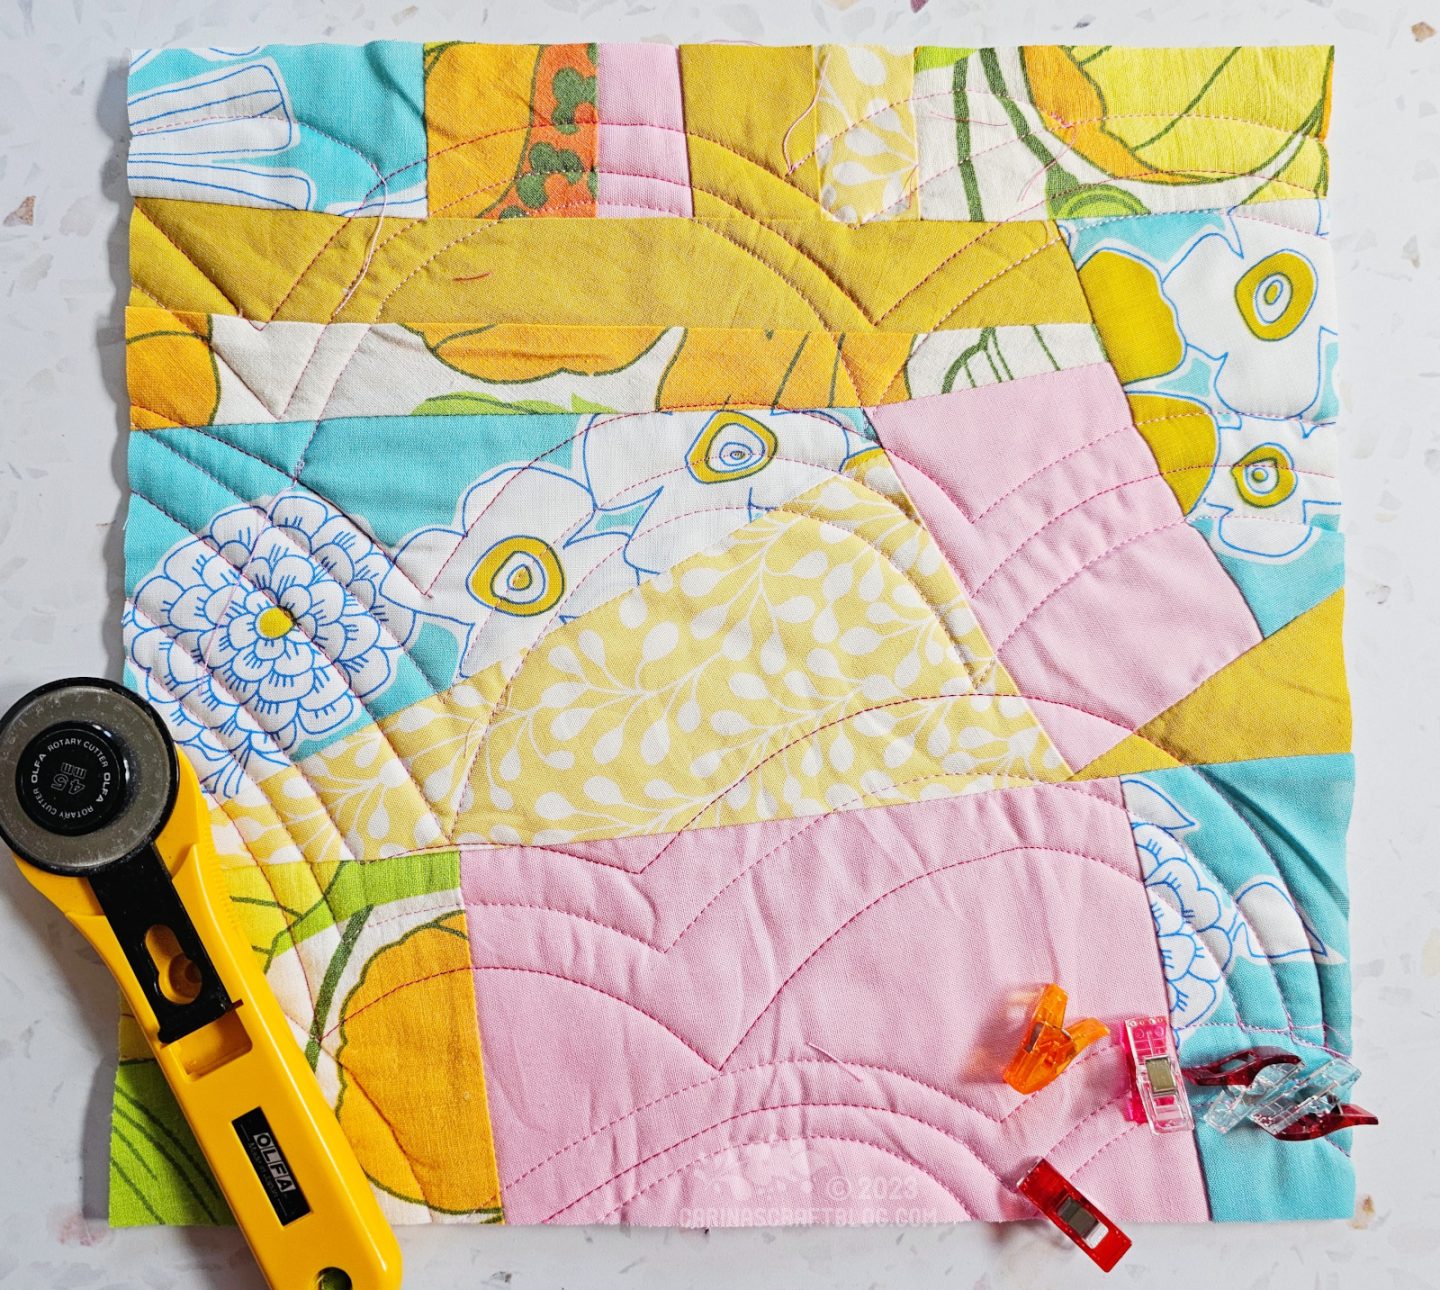 Small square quilt made of randomly shaped pieces of fabric in turquoise, pink and yellow colours.